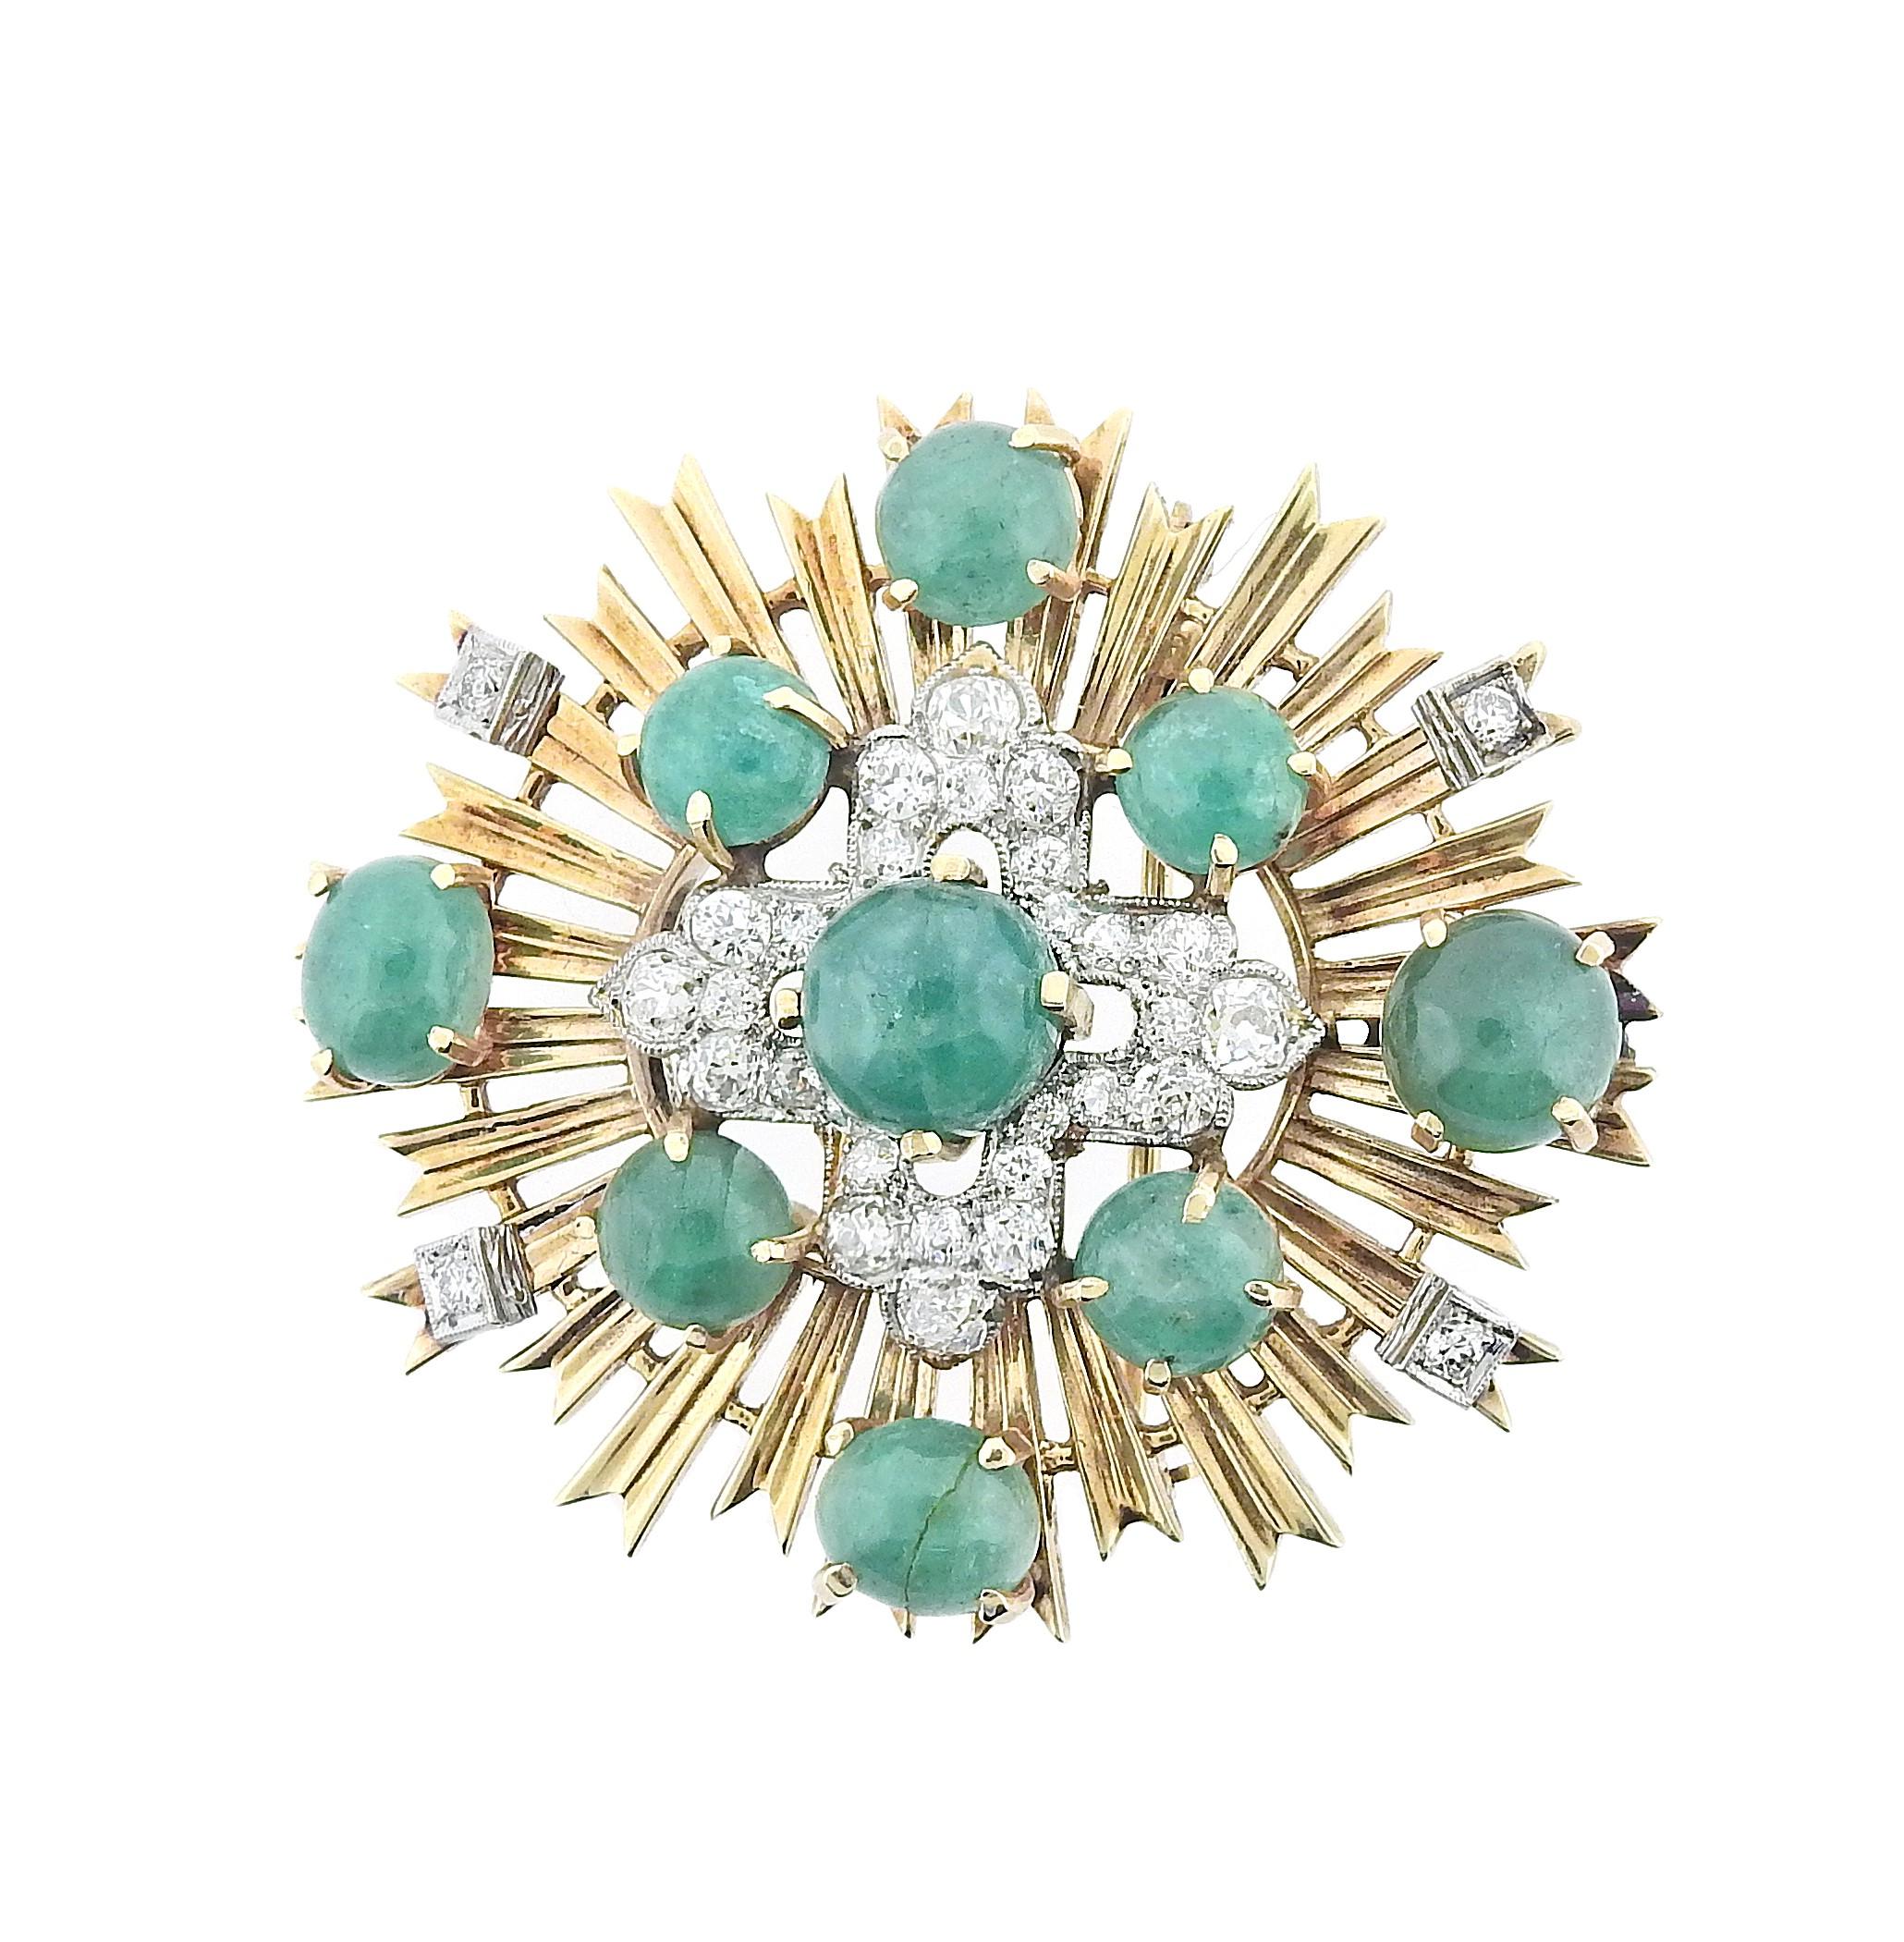 Vintage 14k gold Seaman Schepps brooch, with emerald cabochons and approx. 1.80ctw VS/H diamonds. Brooch measures 50mm x 45mm. Marked: 14k, Seaman Schepps. Weight is 33.3 grams.